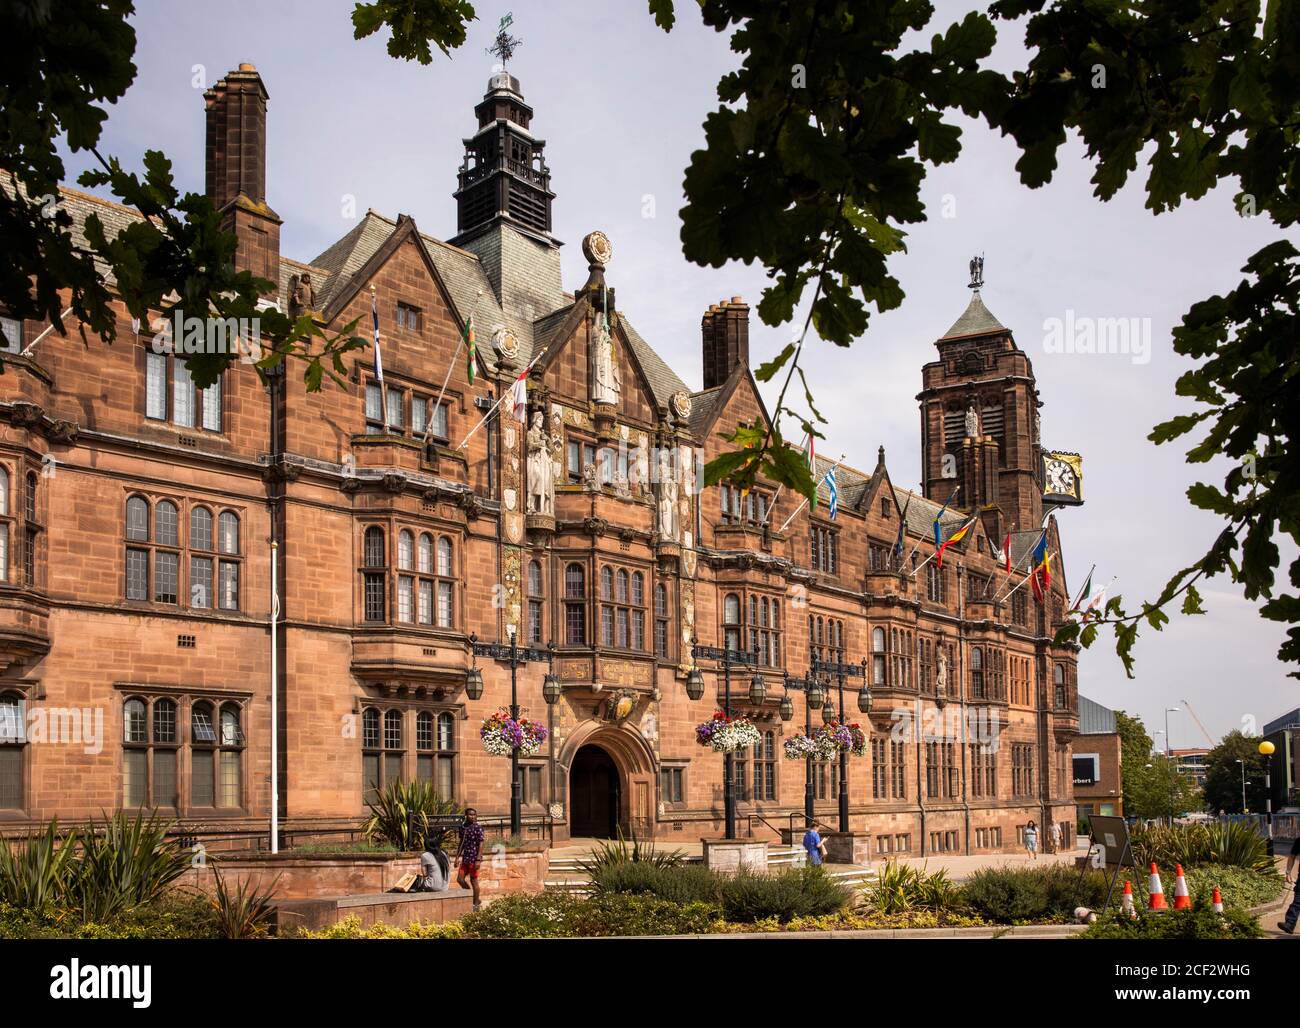 UK, England, Coventry, Council House, early C20th Tudor style civic building Stock Photo